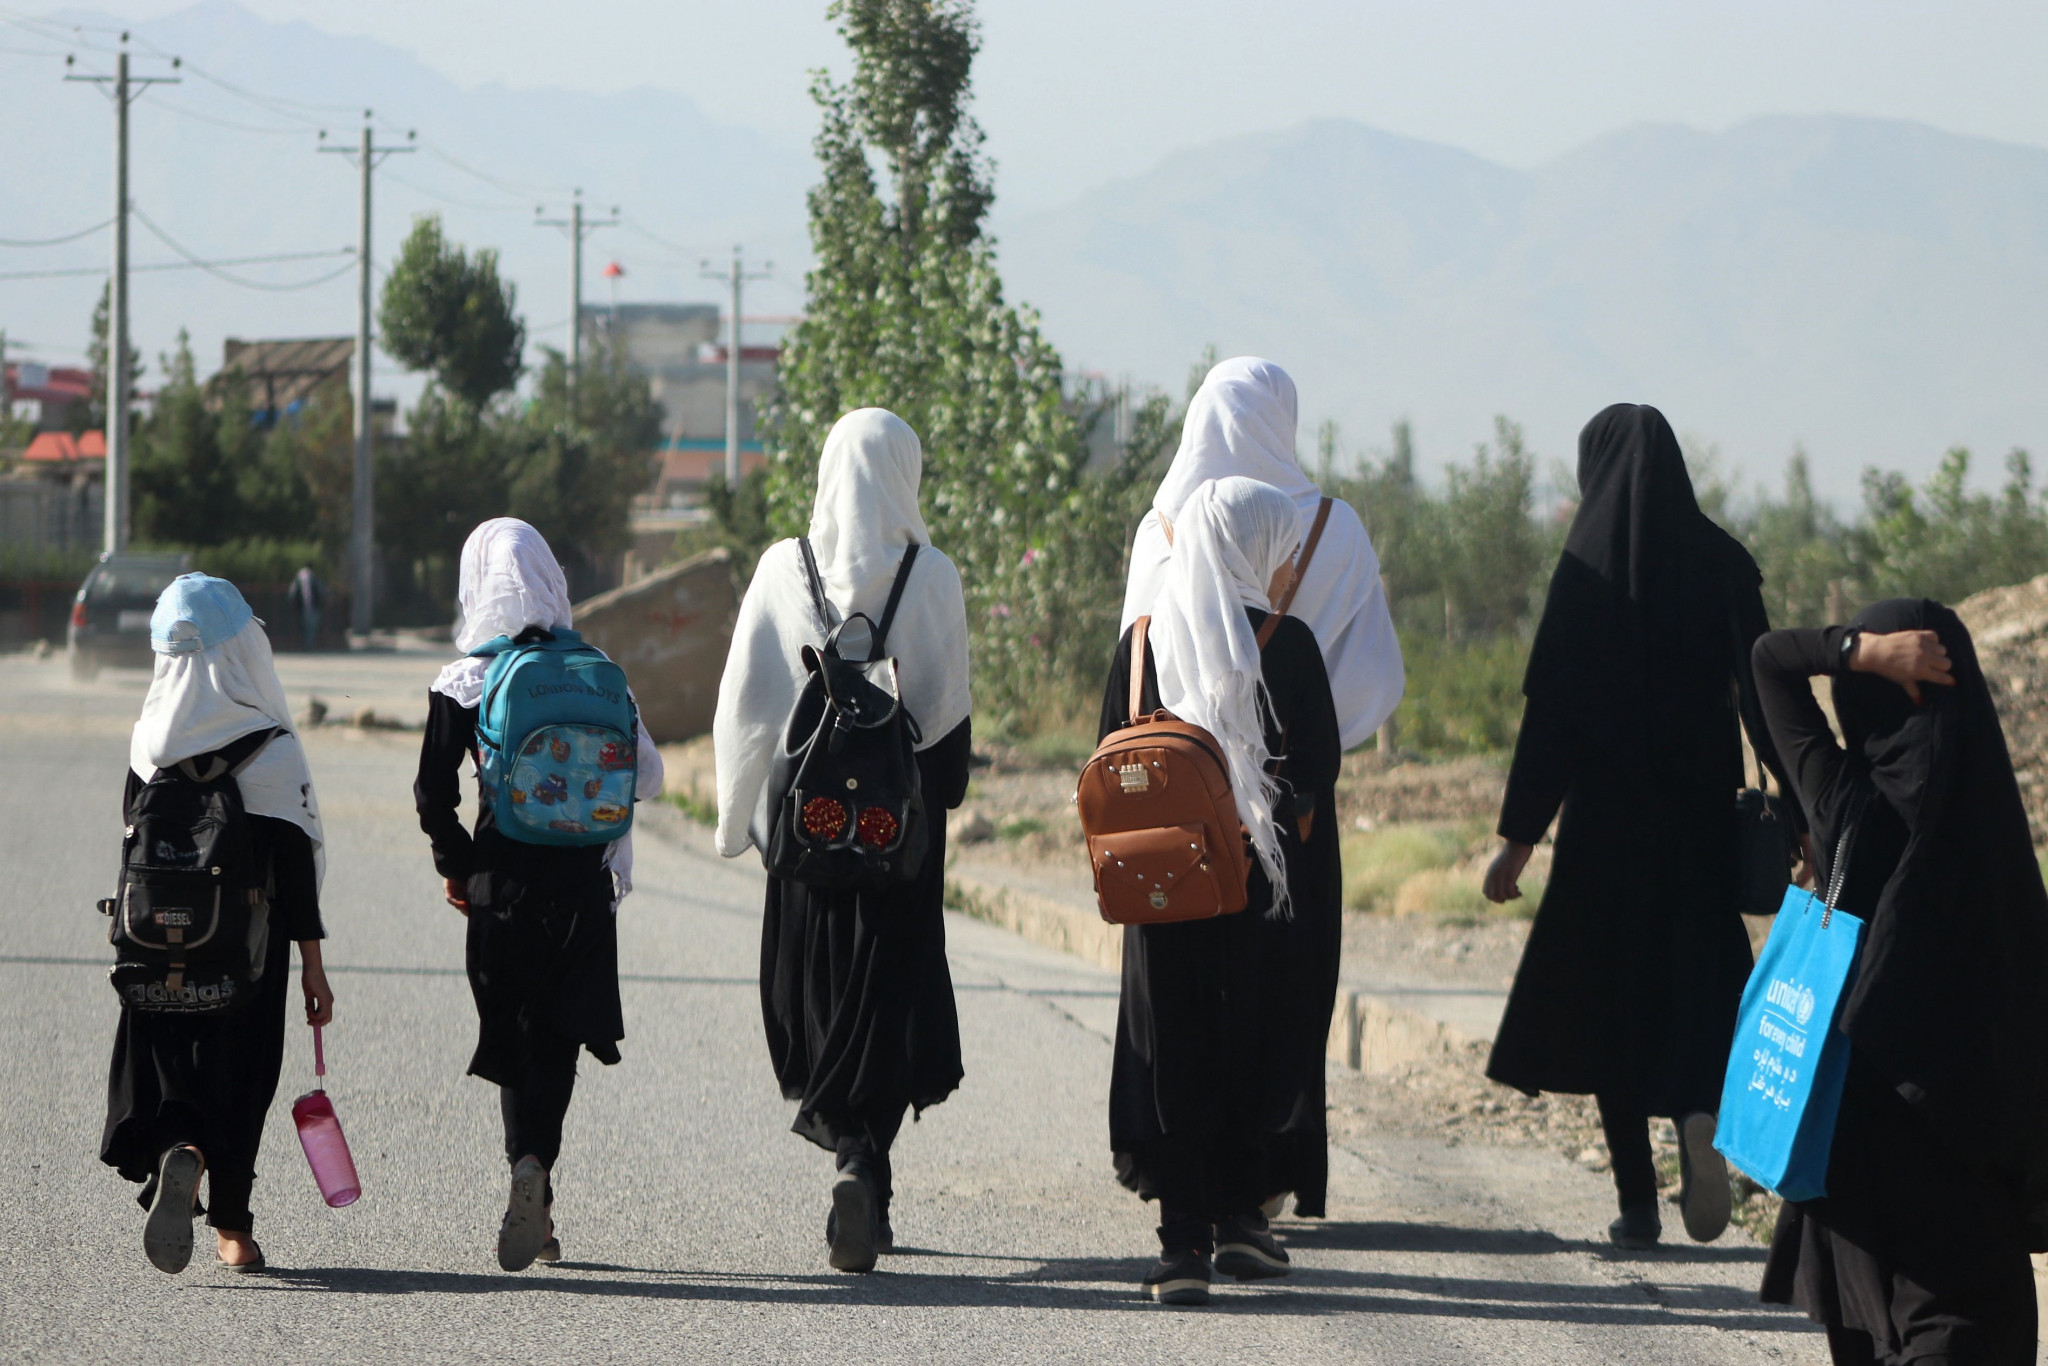 Girls have been banned from attending school under the Taliban regime ©Getty Images